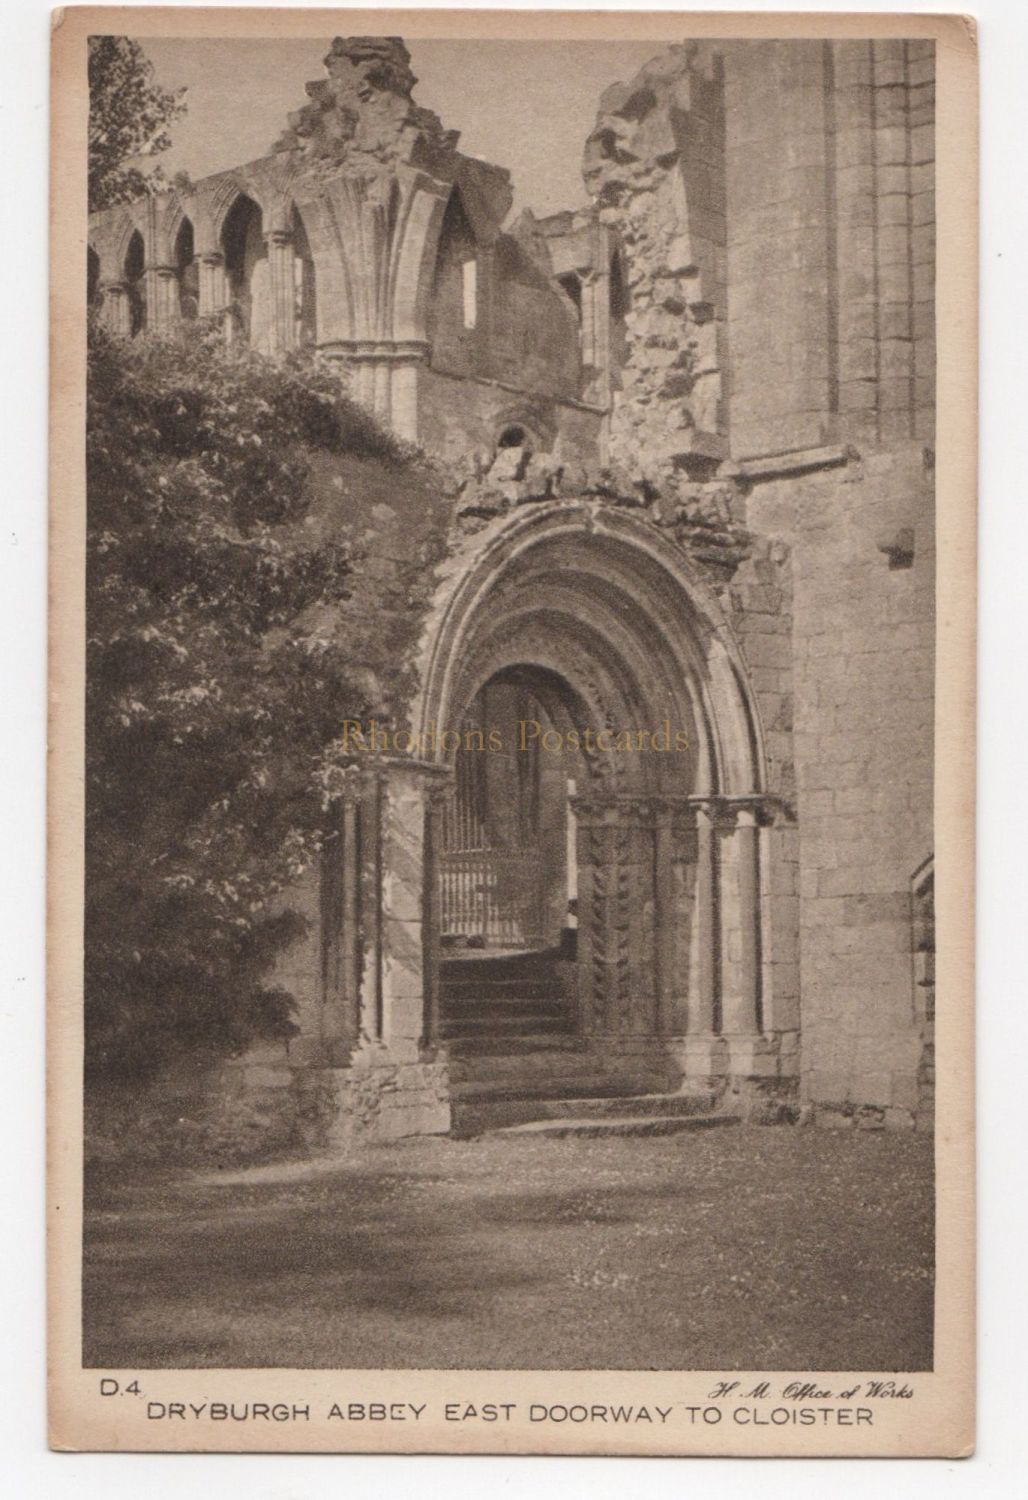 Dryburgh Abbey-East Doorway To Cloister - Early 1900s Postcard